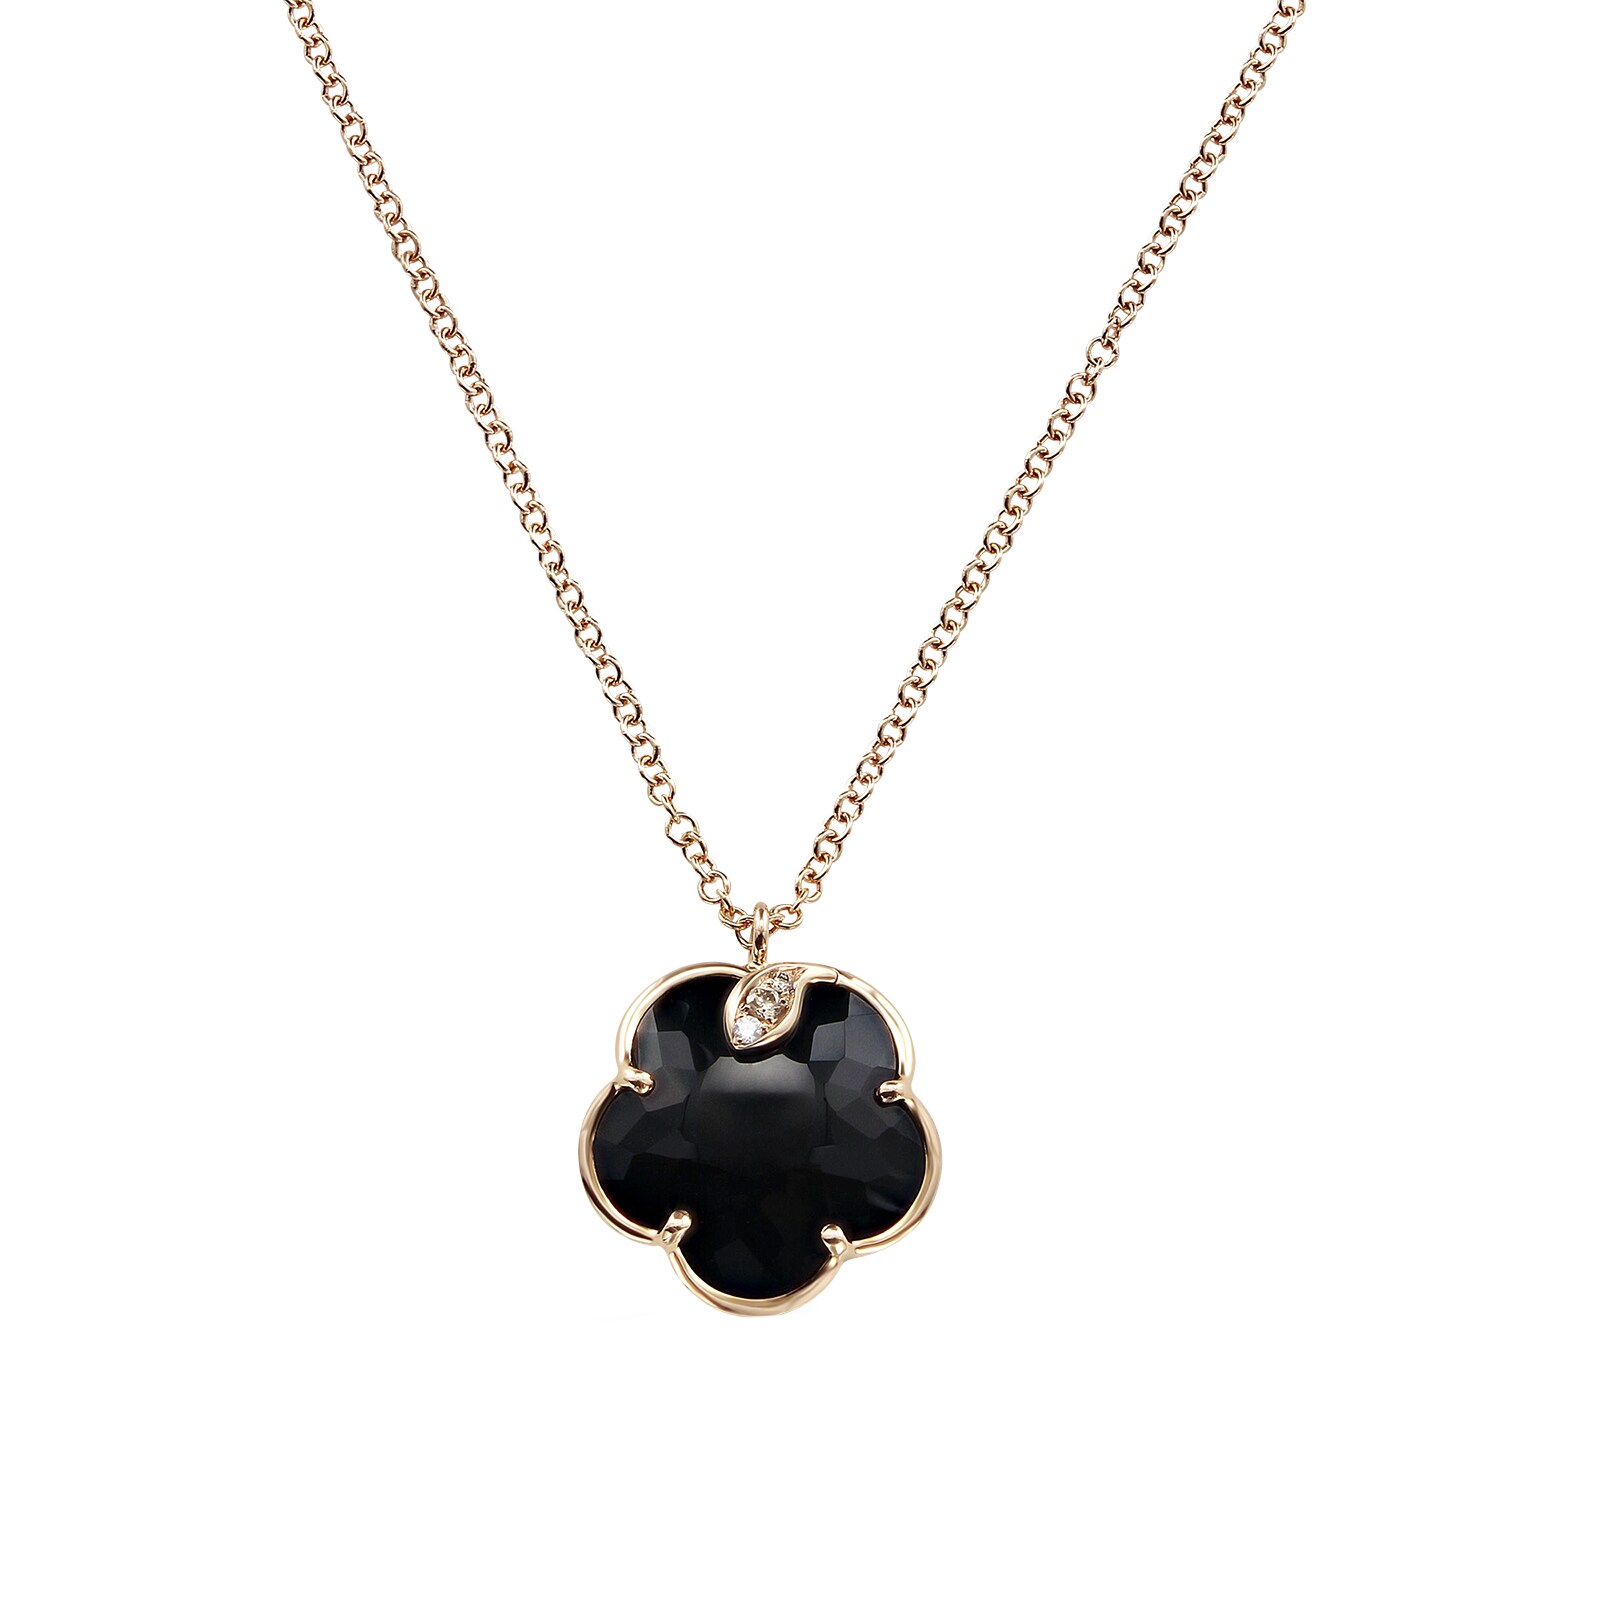 Petit Joli Necklace in 18ct Rose Gold with Onyx and Diamonds